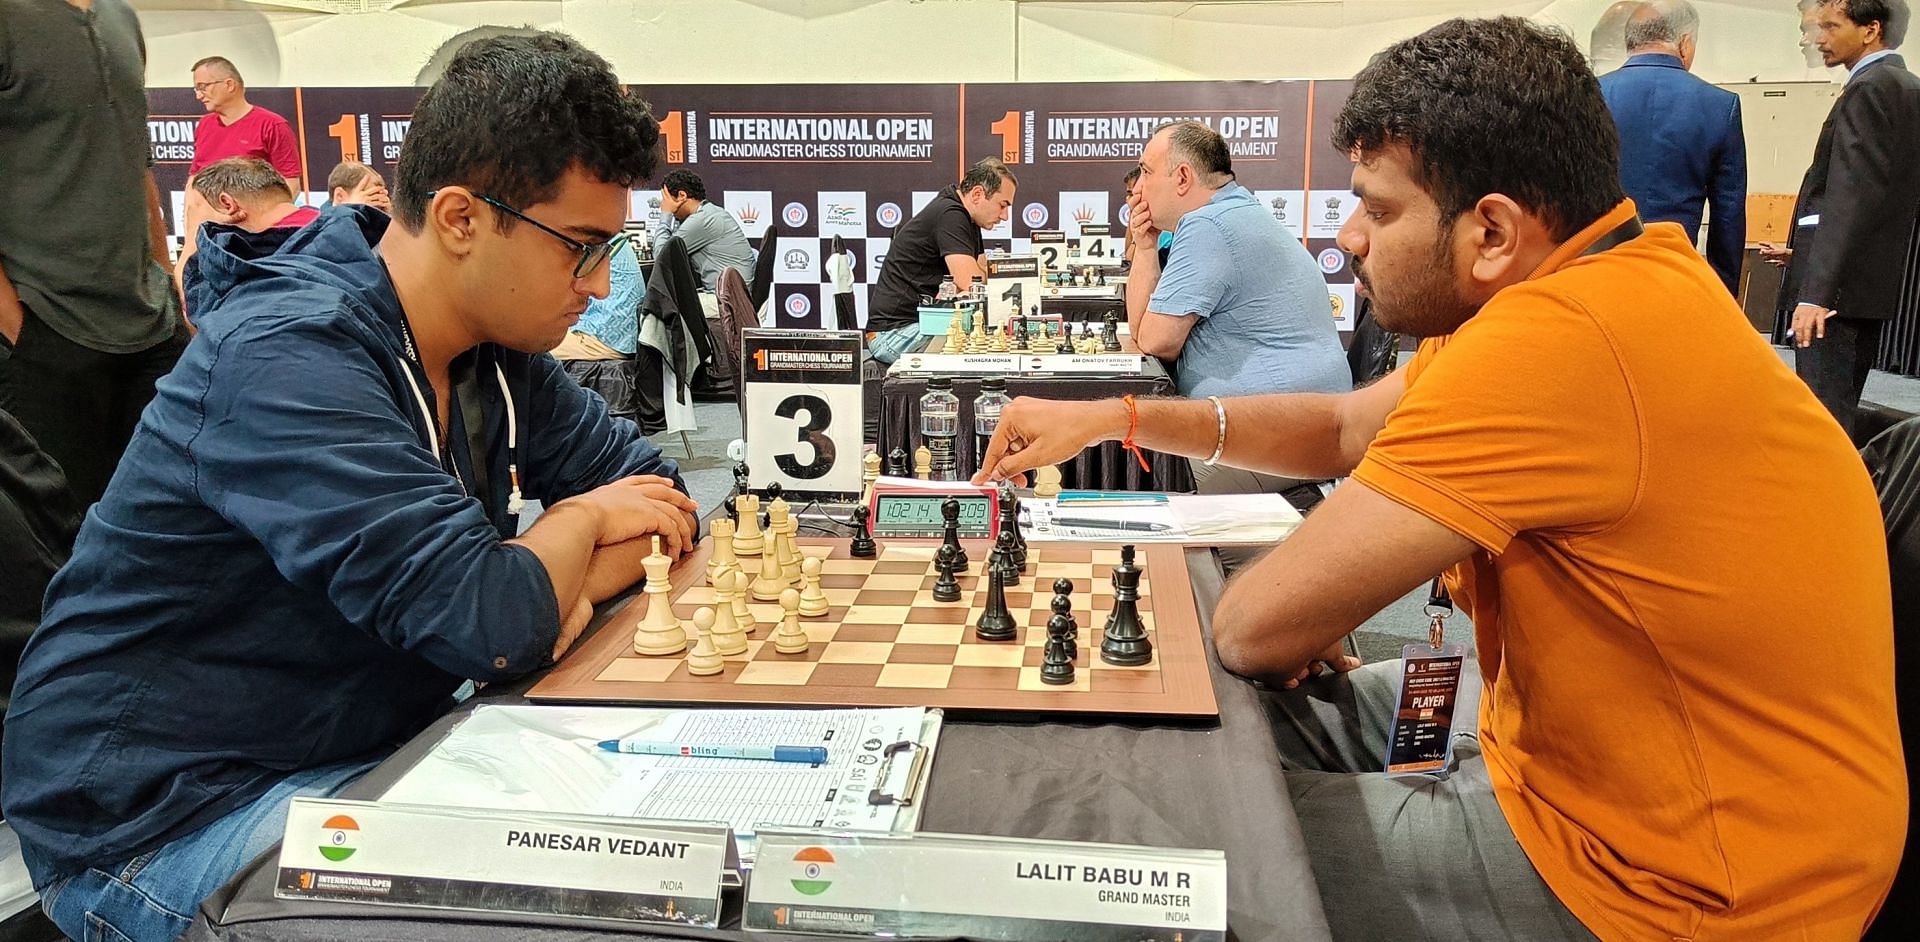 Indian GM Lalith Babu MR (R) beat Vedant Panesar in the second round in Pune on Wednesday. (Pic credit: AICF)